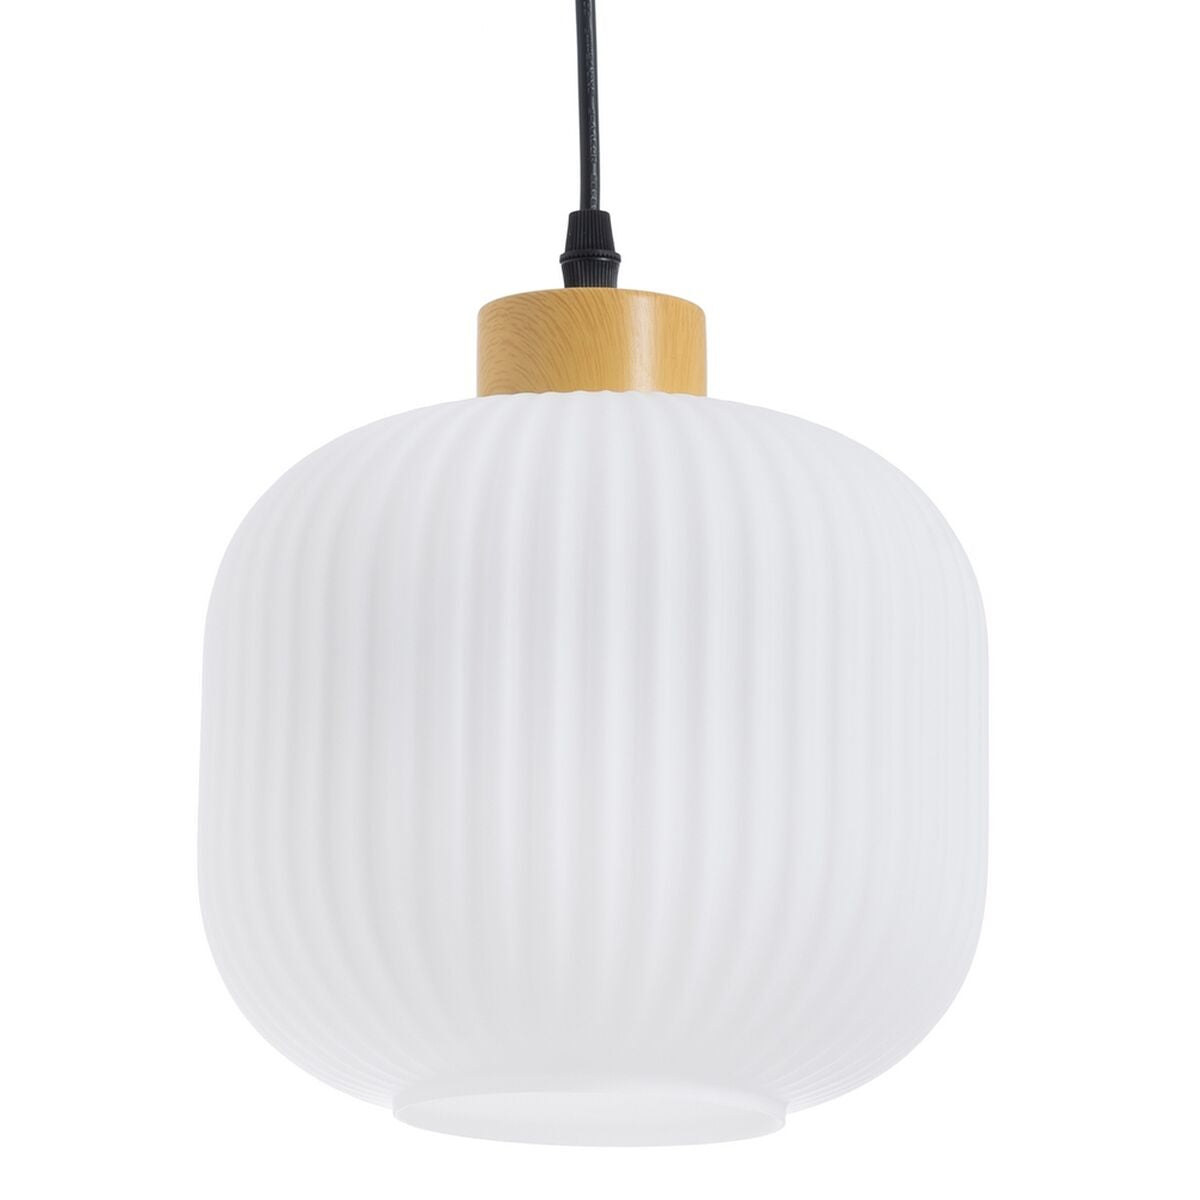 White Ceiling Light with Wooden Style Detail (20 x 20 x 30 cm)